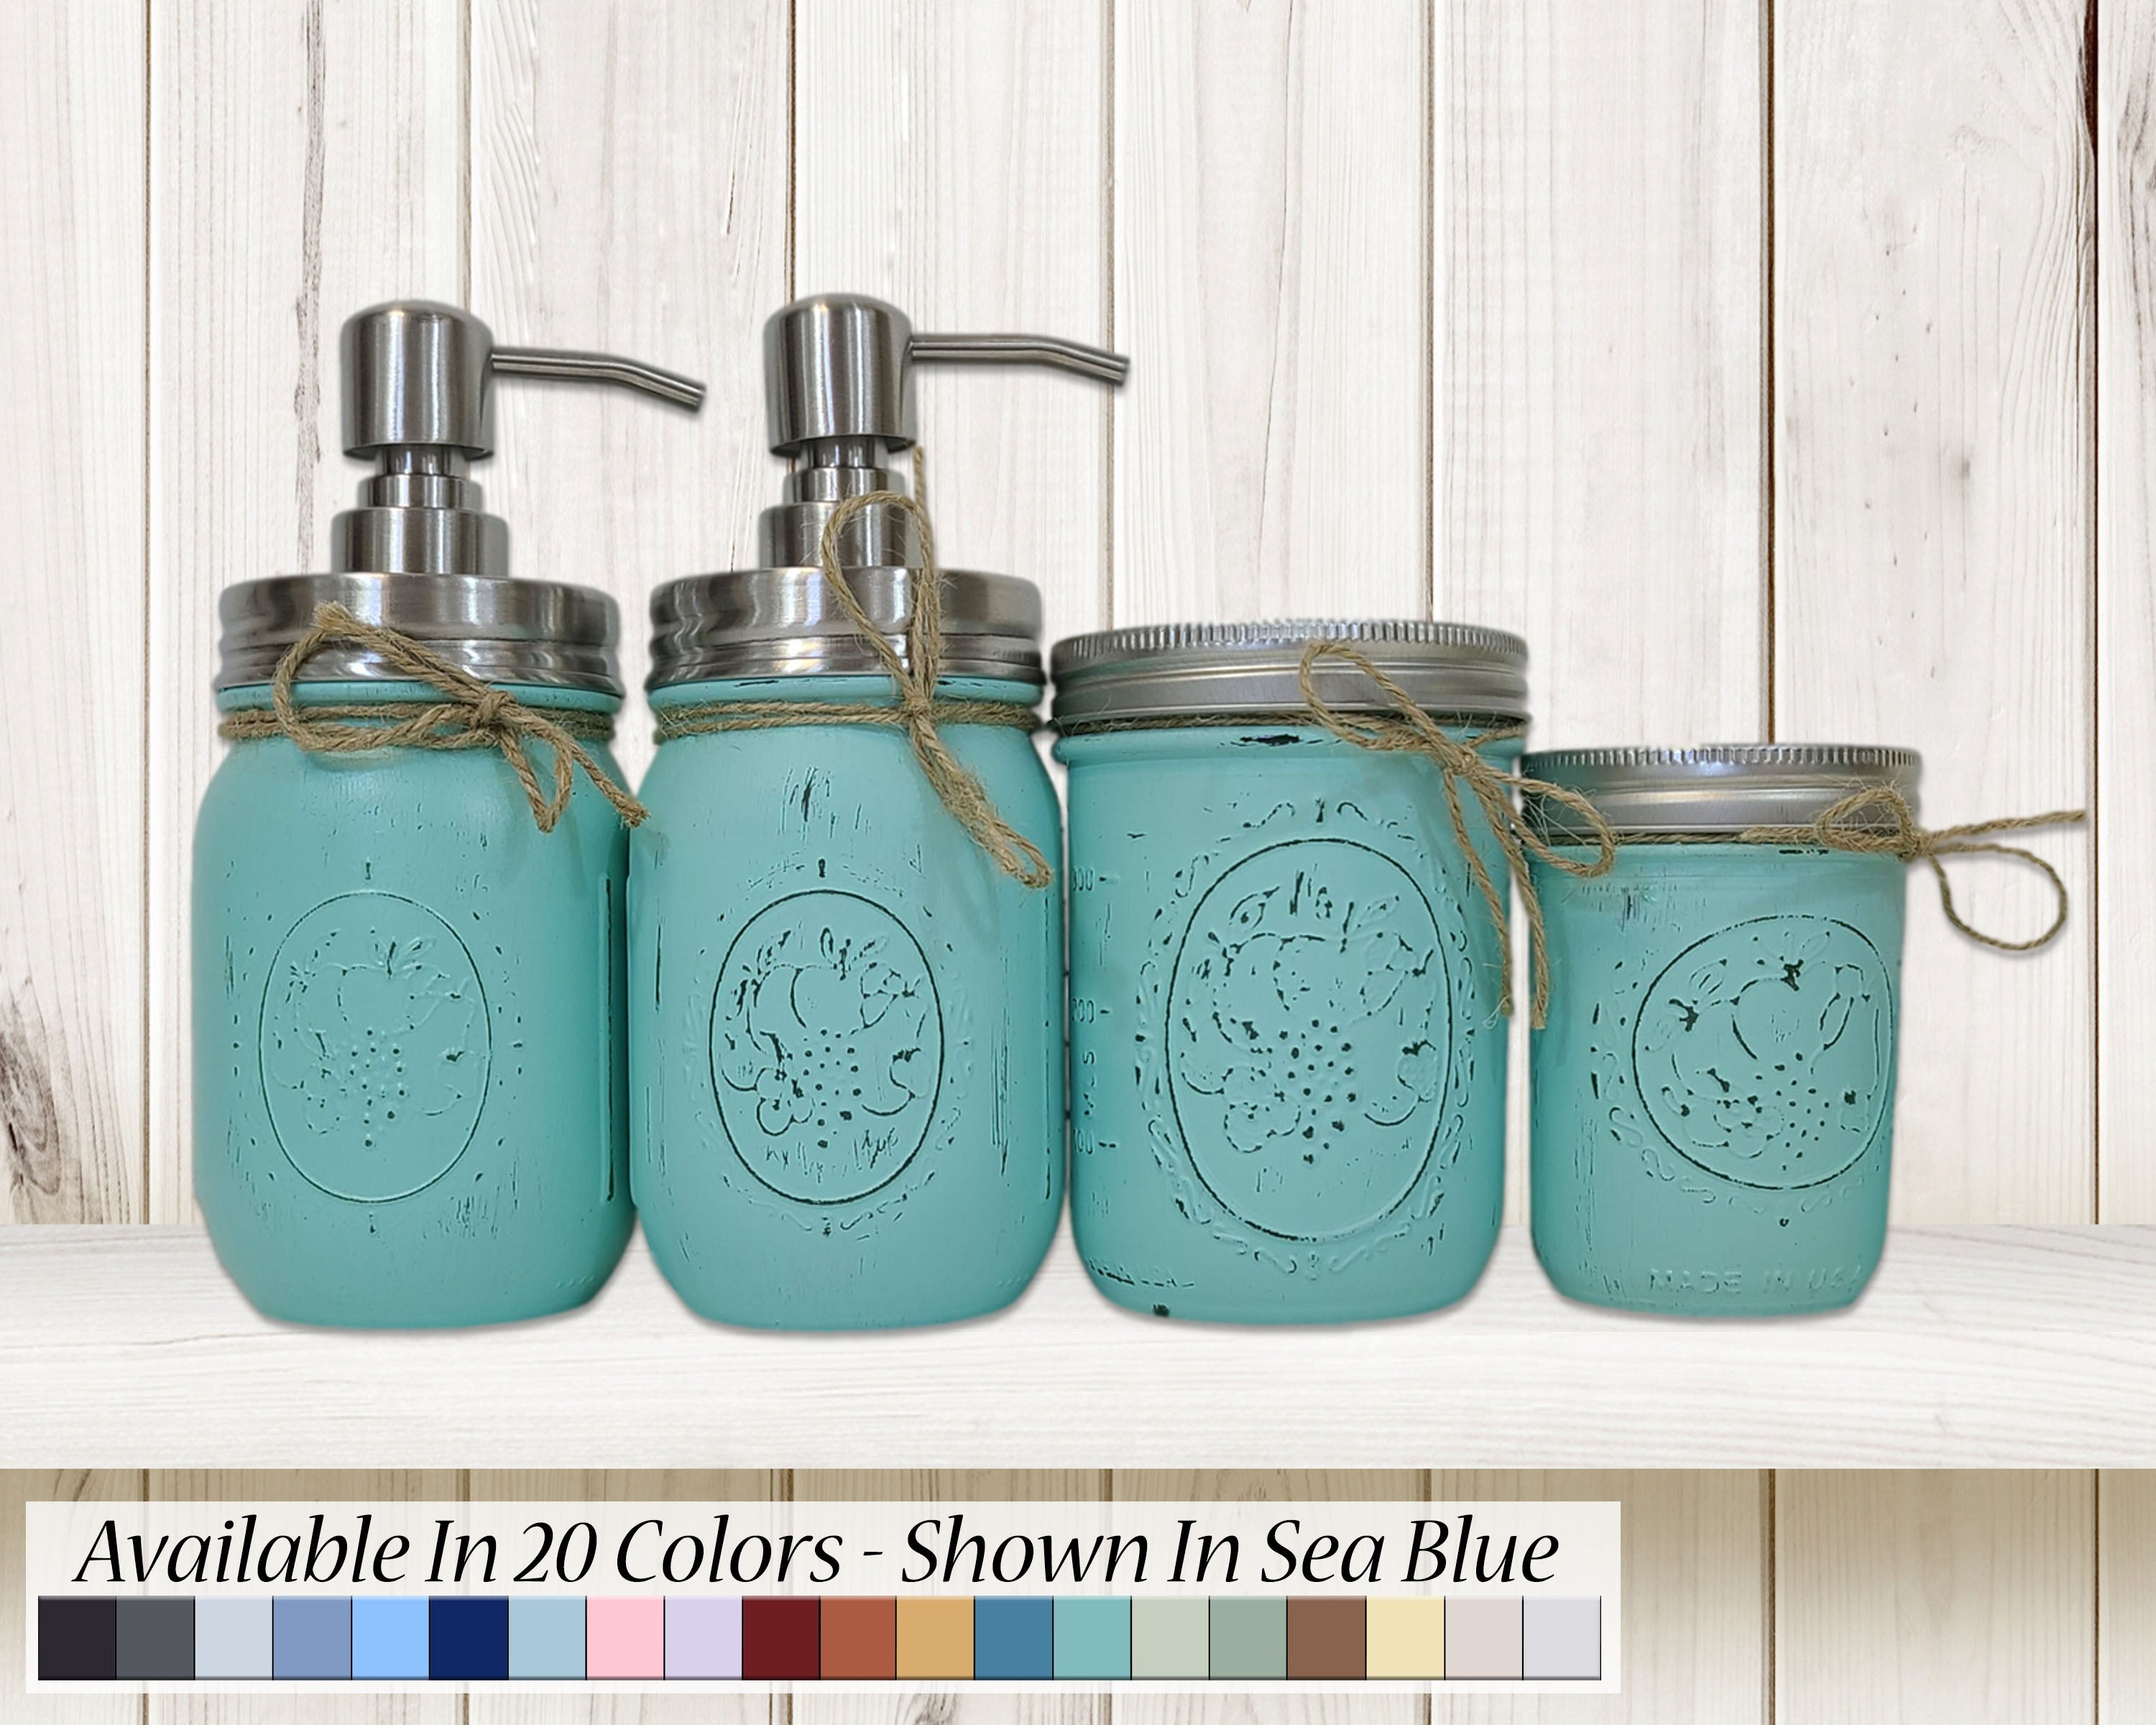 Custom Hand Painted Mason Jar Set with Pump Lids, Shown in Sea Blue with Silver Lids